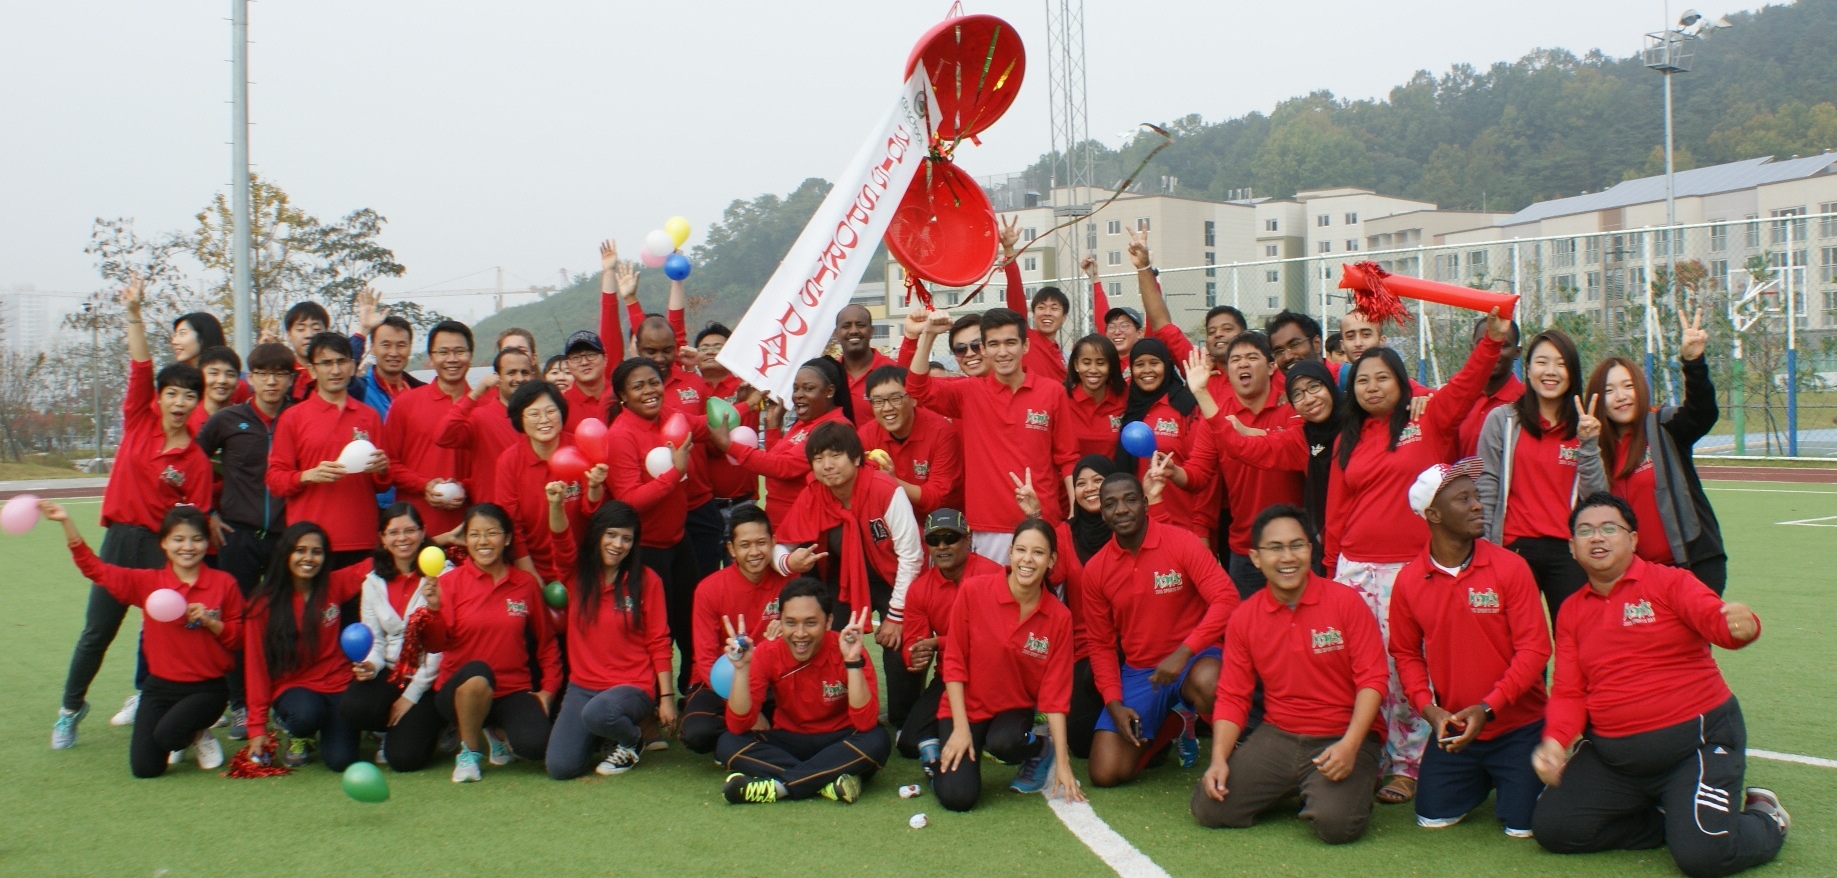 We stand in unity : 2015 KDI School Sports Day